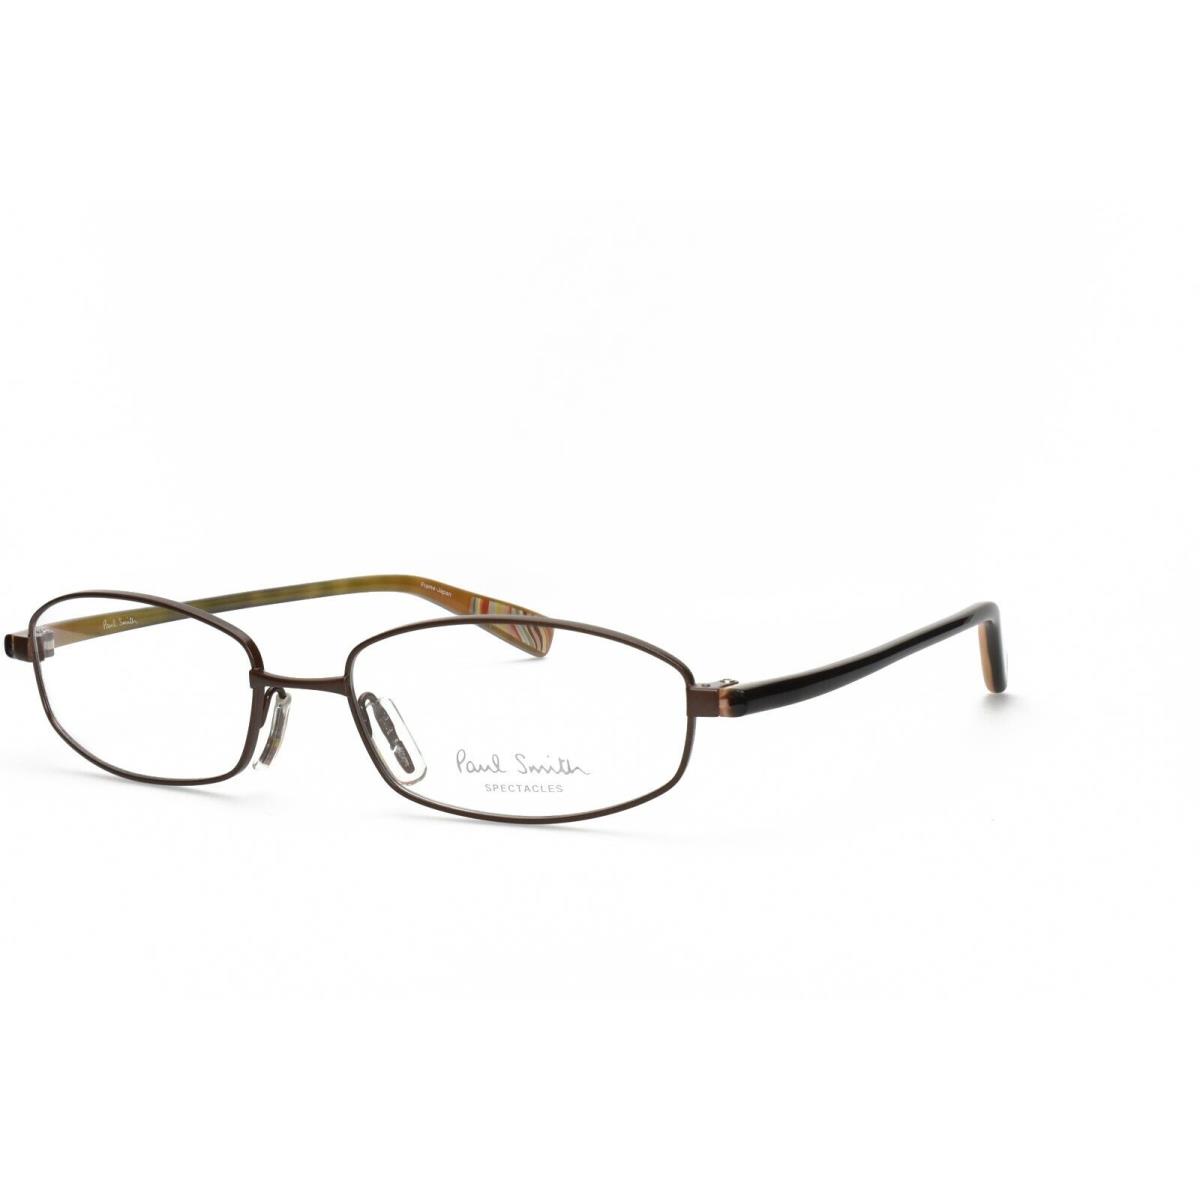 Paul Smith PS 194 Cho Eyeglasses Frames Only 51-16-140